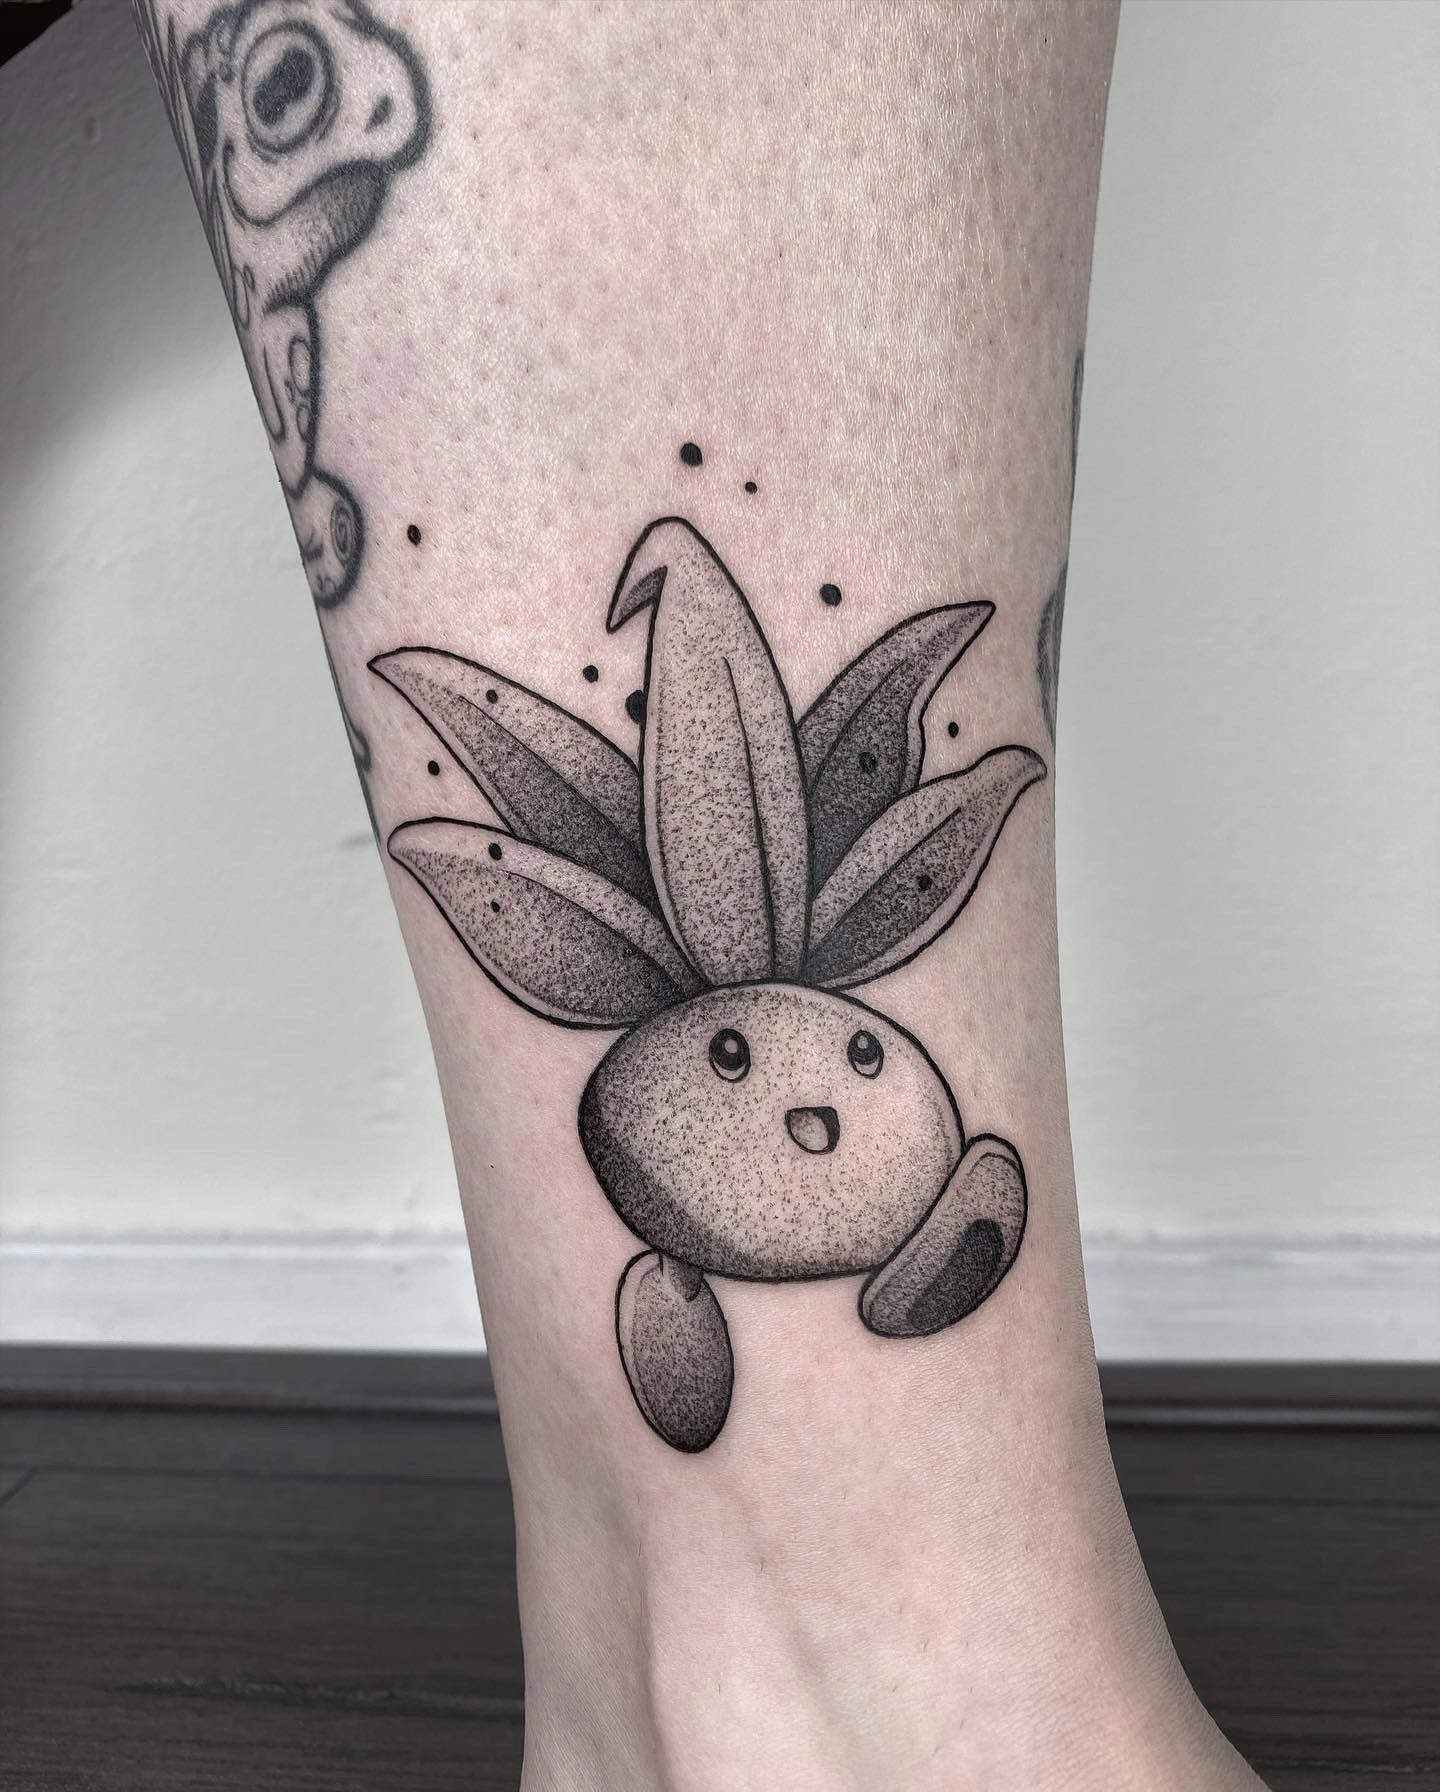 Are you a fan of Pokémon still to this day? If so, why not get this cool and quirky design? It is a masterpiece that will suit most women who like cute and cool ankle options, as well as tattoos that are straight-up fun and vibrant.